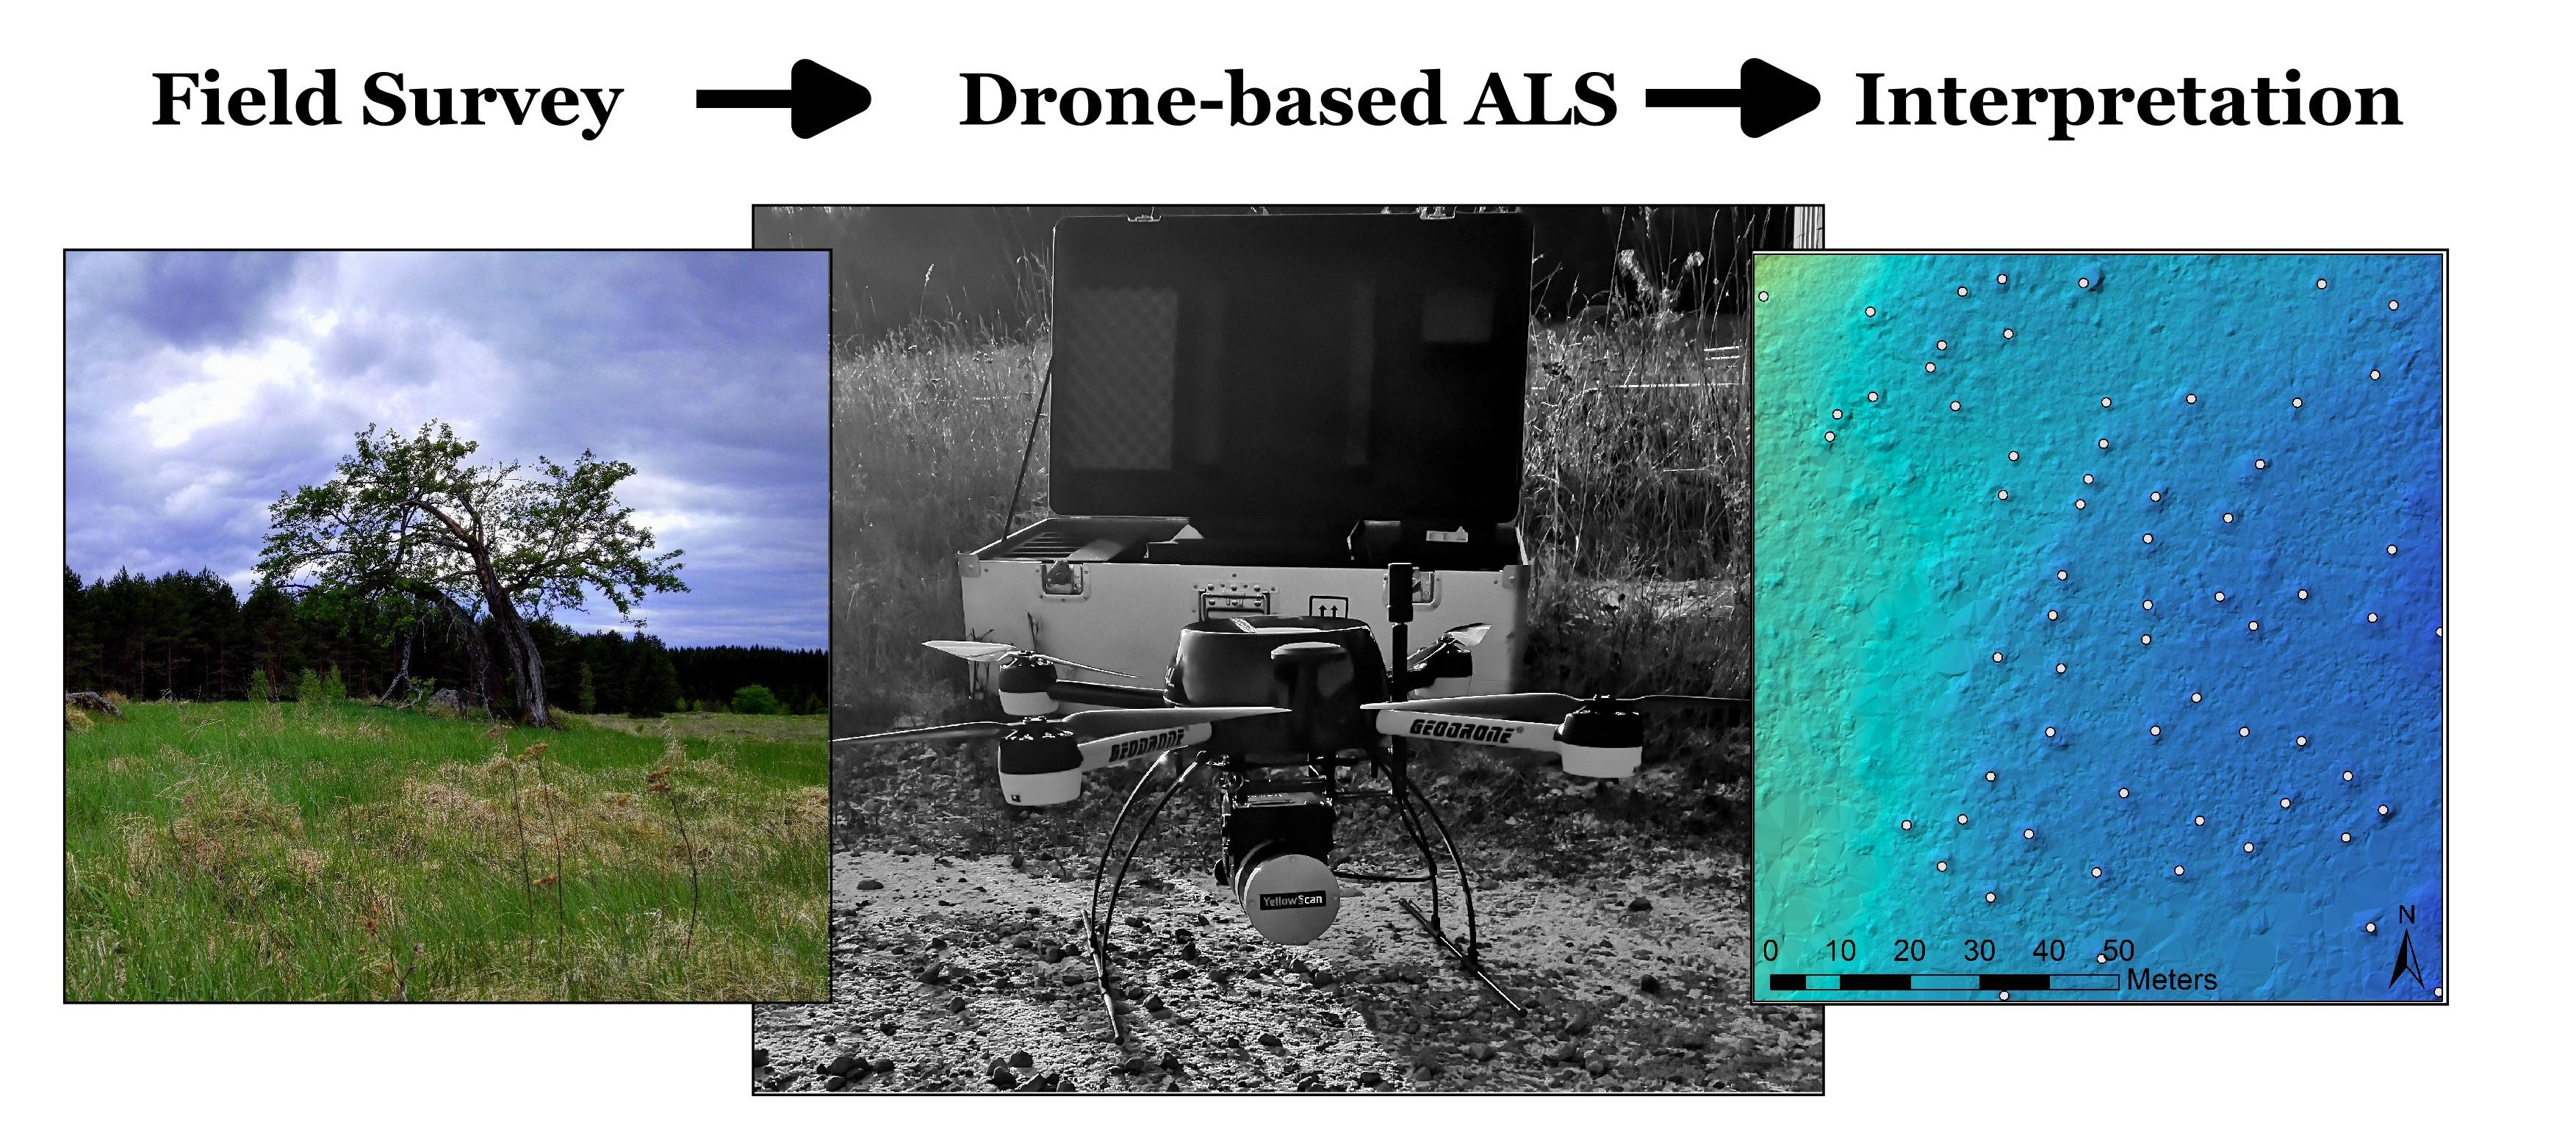 Remote Sensing | Free Full-Text | The Hidden Cairns—A Study of Drone-Based ALS as an Archaeological Survey